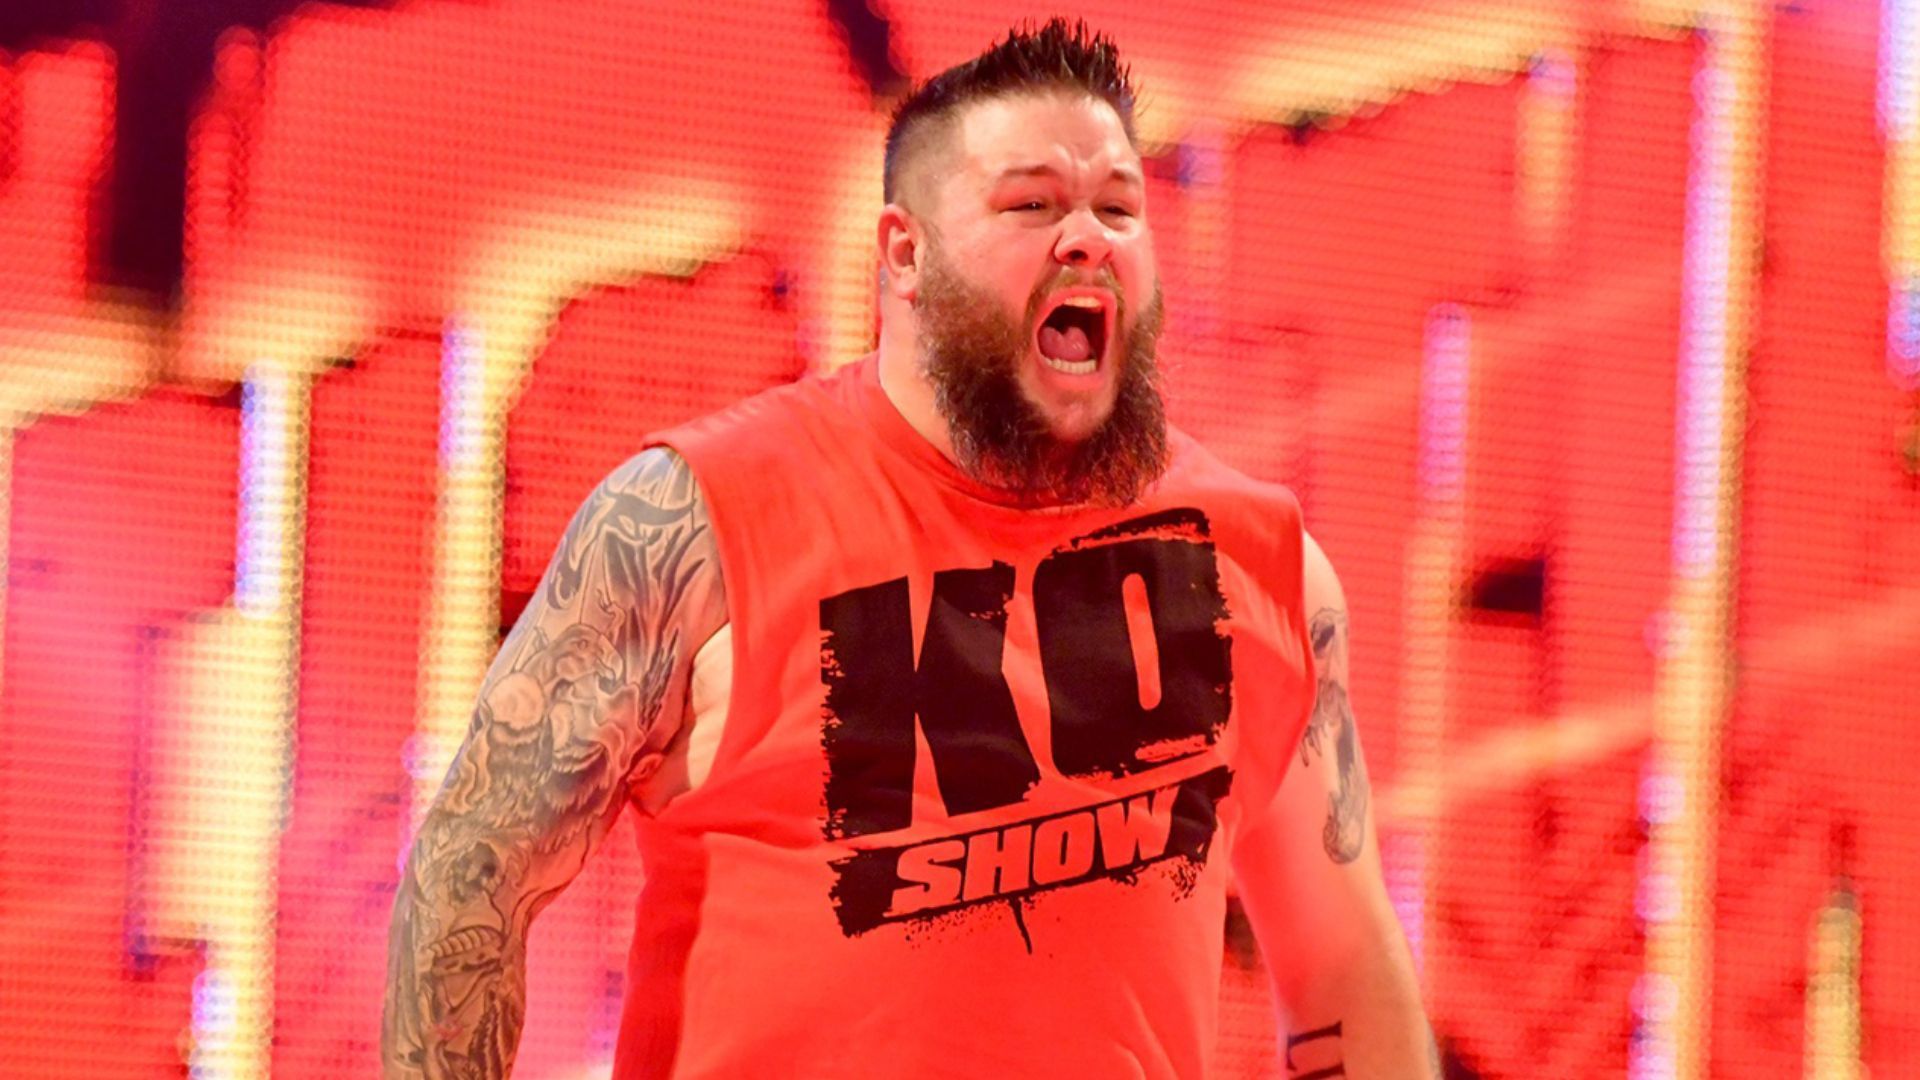 Kevin Owens has not appeared on WWE RAW in recent weeks